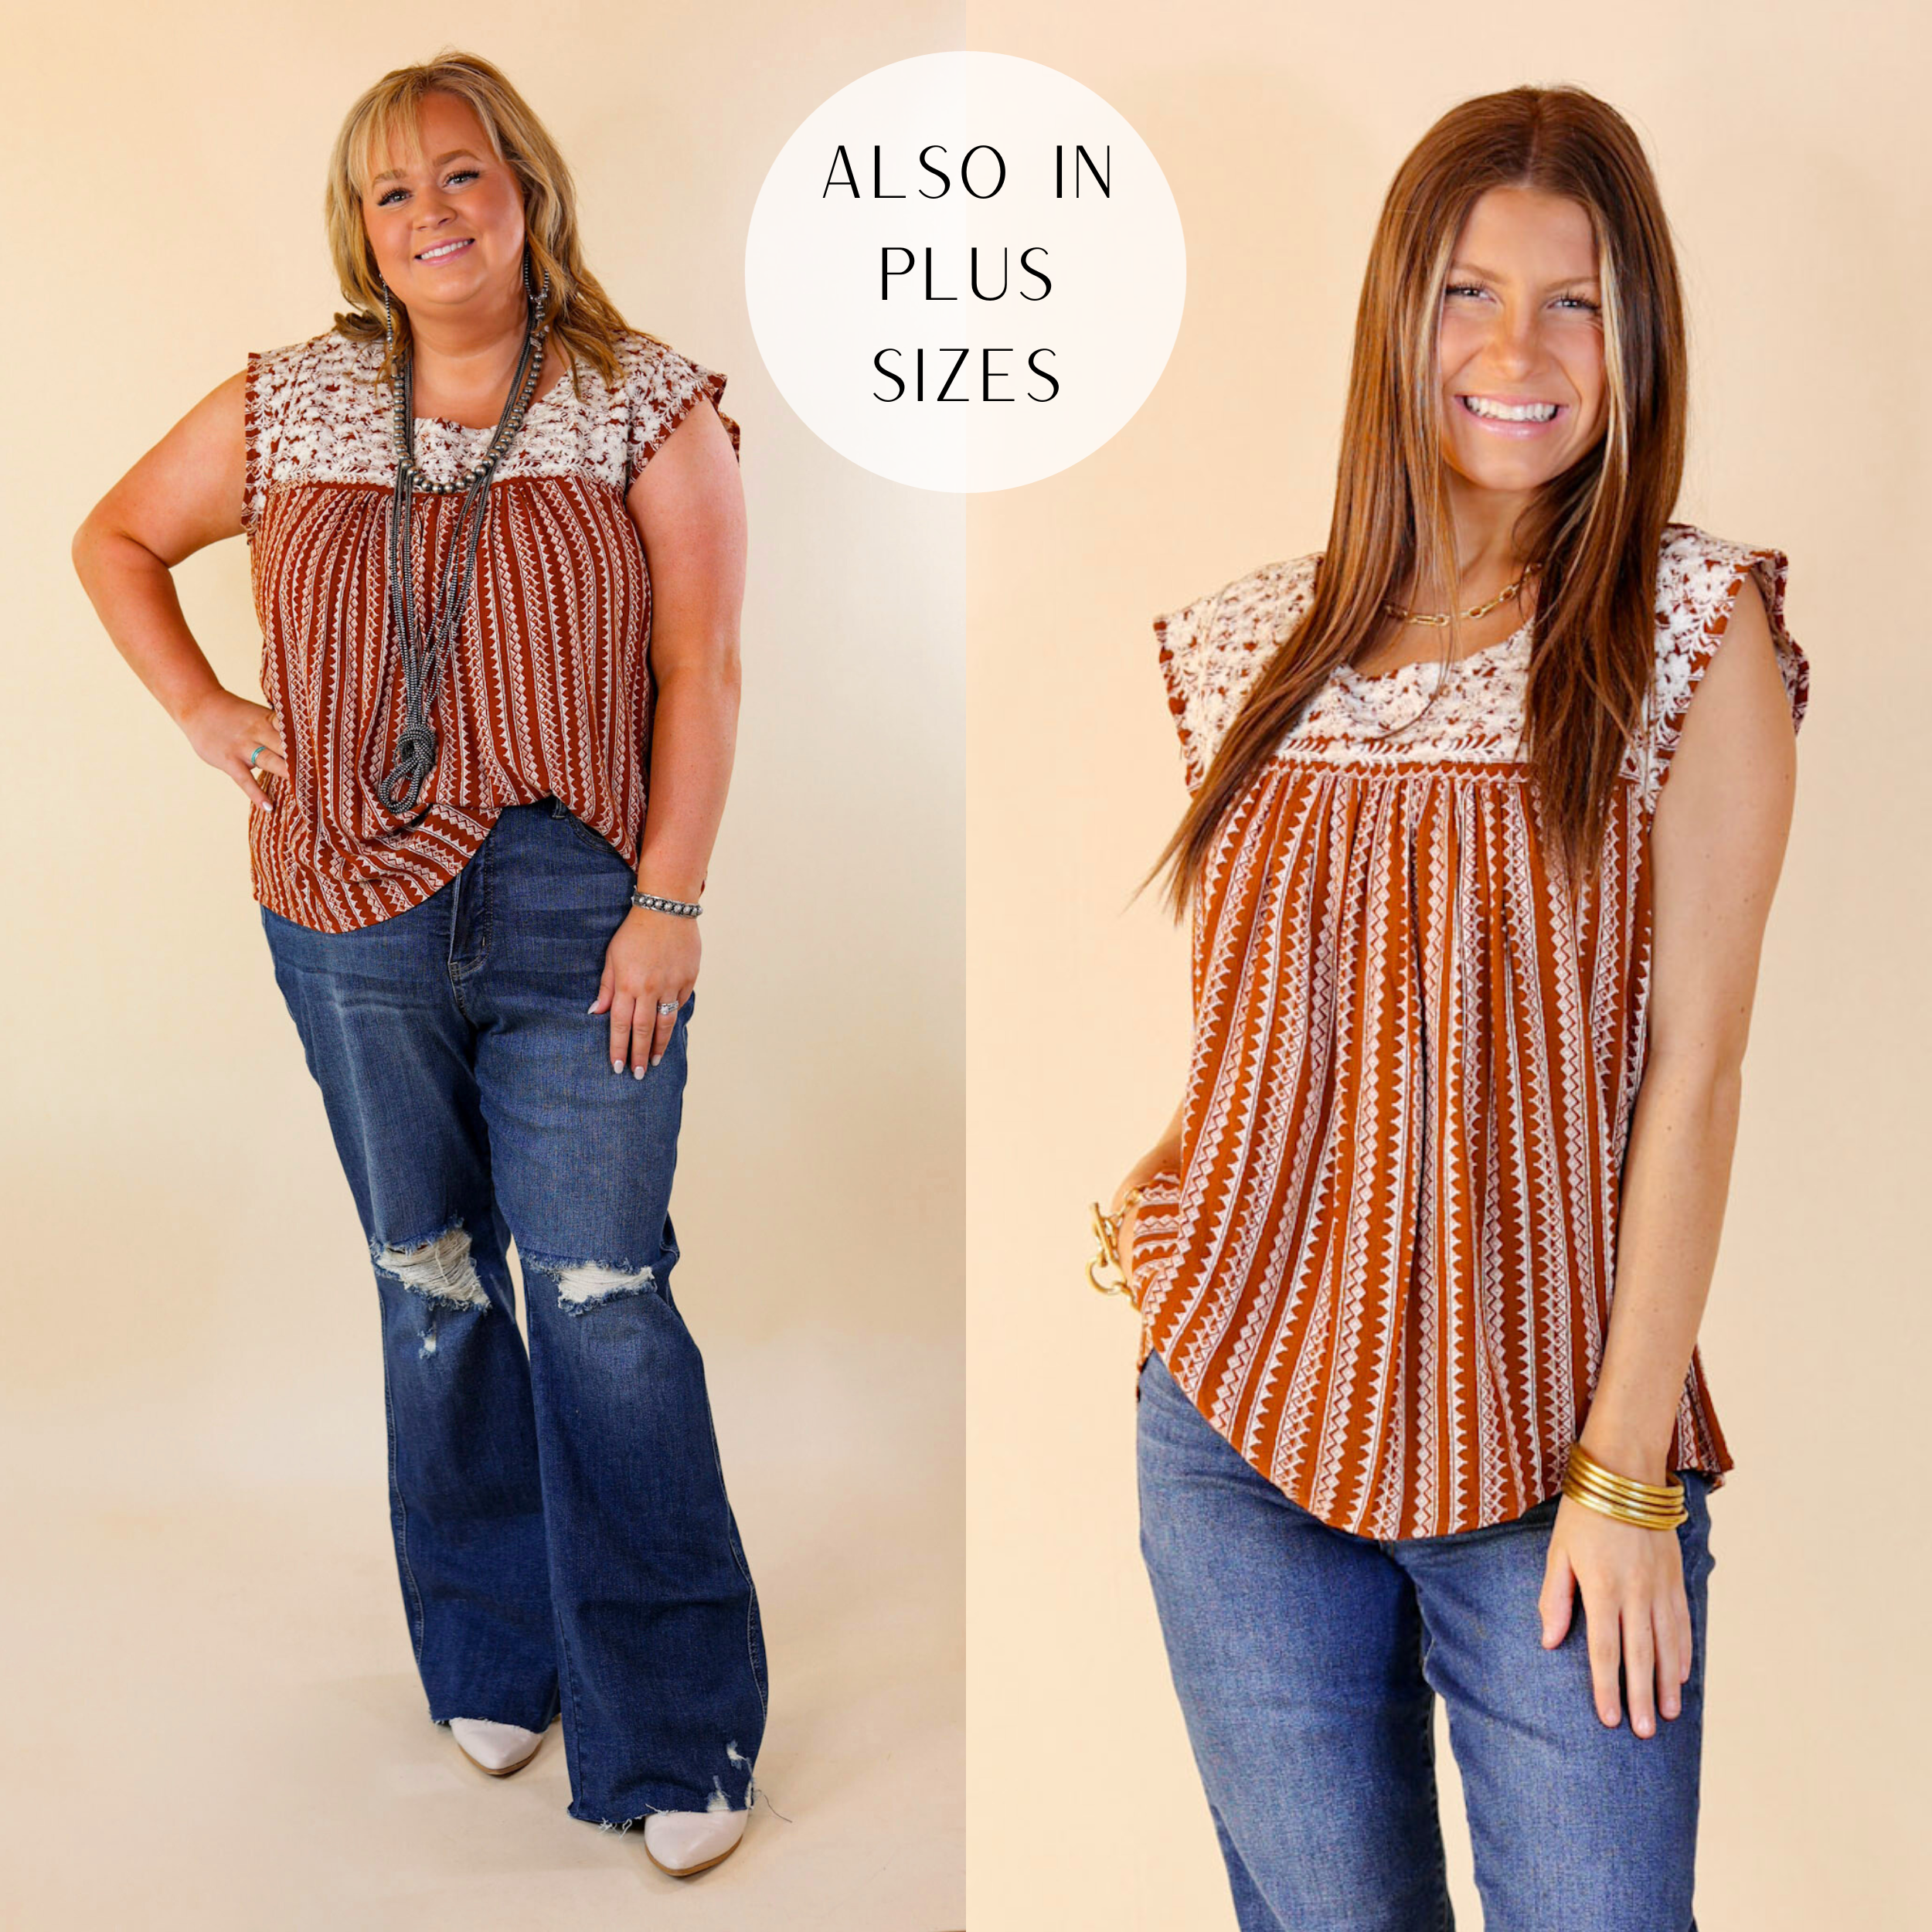 Model is wearing a Rust colored top with white embroidery and a striped white tribal pattern. Model has this paired with distressed jeans, white booties, and silver jewelry.